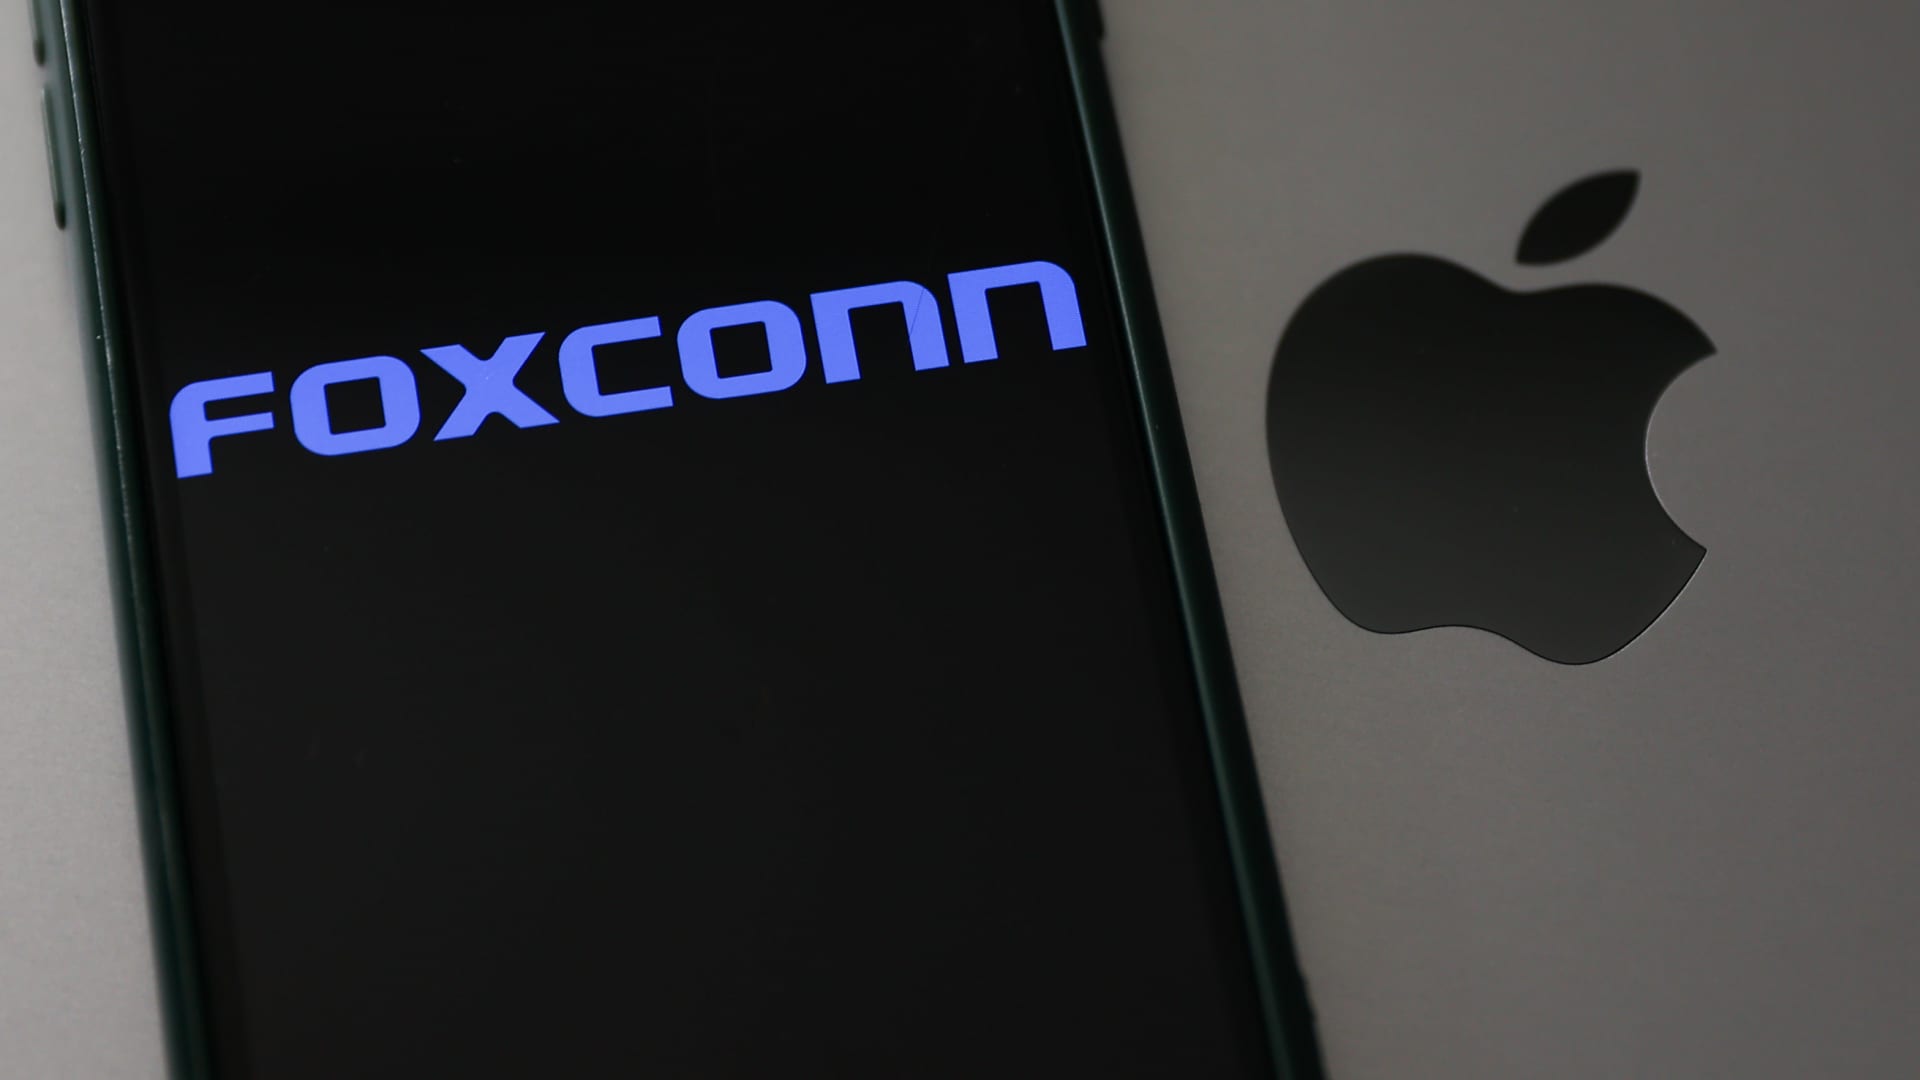 iPhone maker Foxconn to invest 0 million into phone and chip project in India